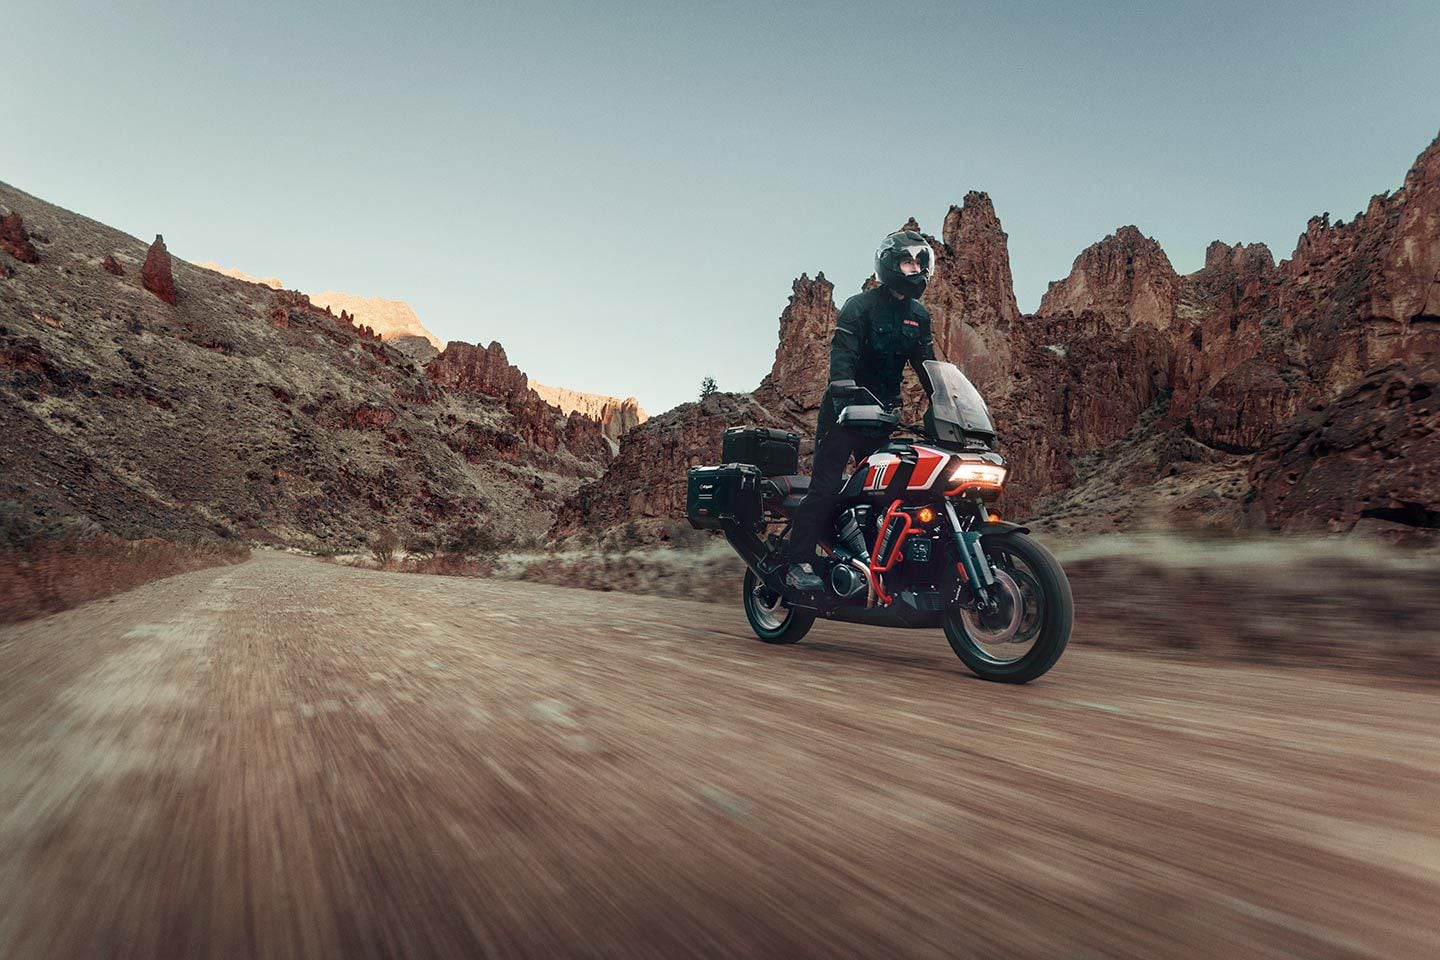 After thorough testing in 2021, <i>Cycle World</i> declared, “Its stellar 60-degree DOHC Revolution Max 1250 V-twin produces 128 hp and 81 pound-feet of torque while bolted into a chassis that’s comfortable and quick on the road and highly capable in the dirt. Innovative but rational, spectacular but user friendly; exactly what an adventure bike should be.”